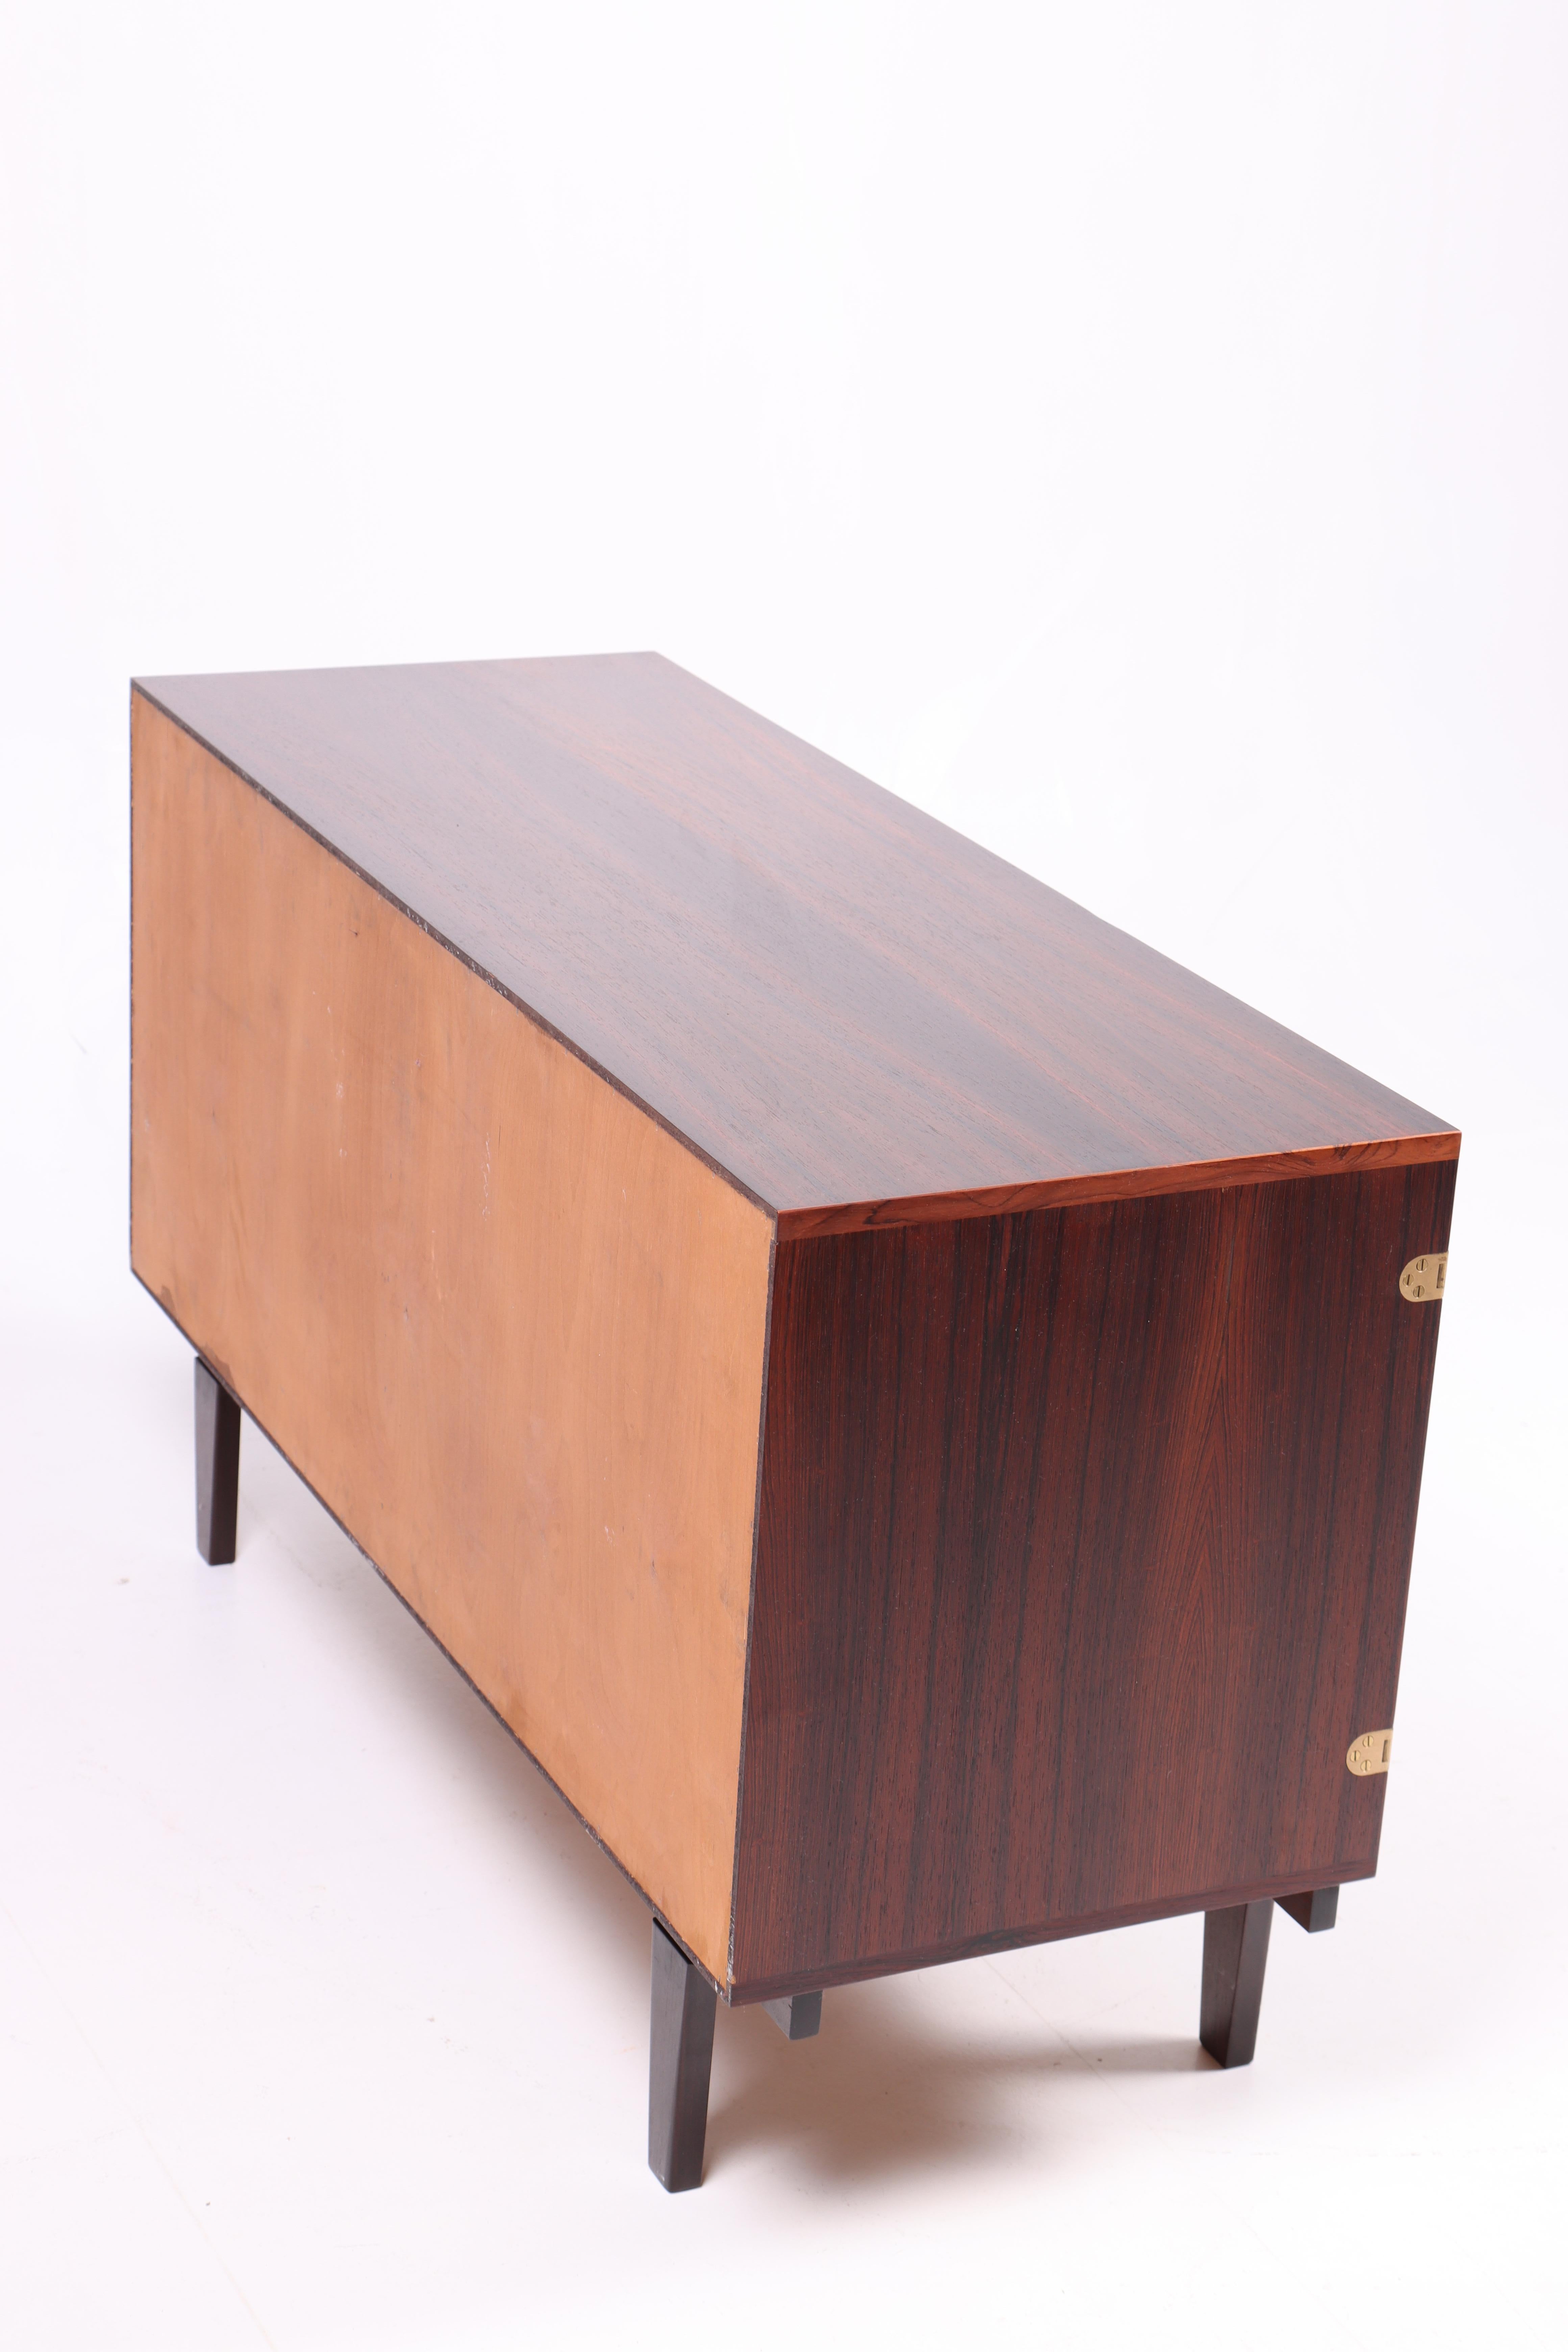 Midcentury Low Cabinet in Rosewood with Brass Hardware by Løgvig, Denmark, 1960s For Sale 3